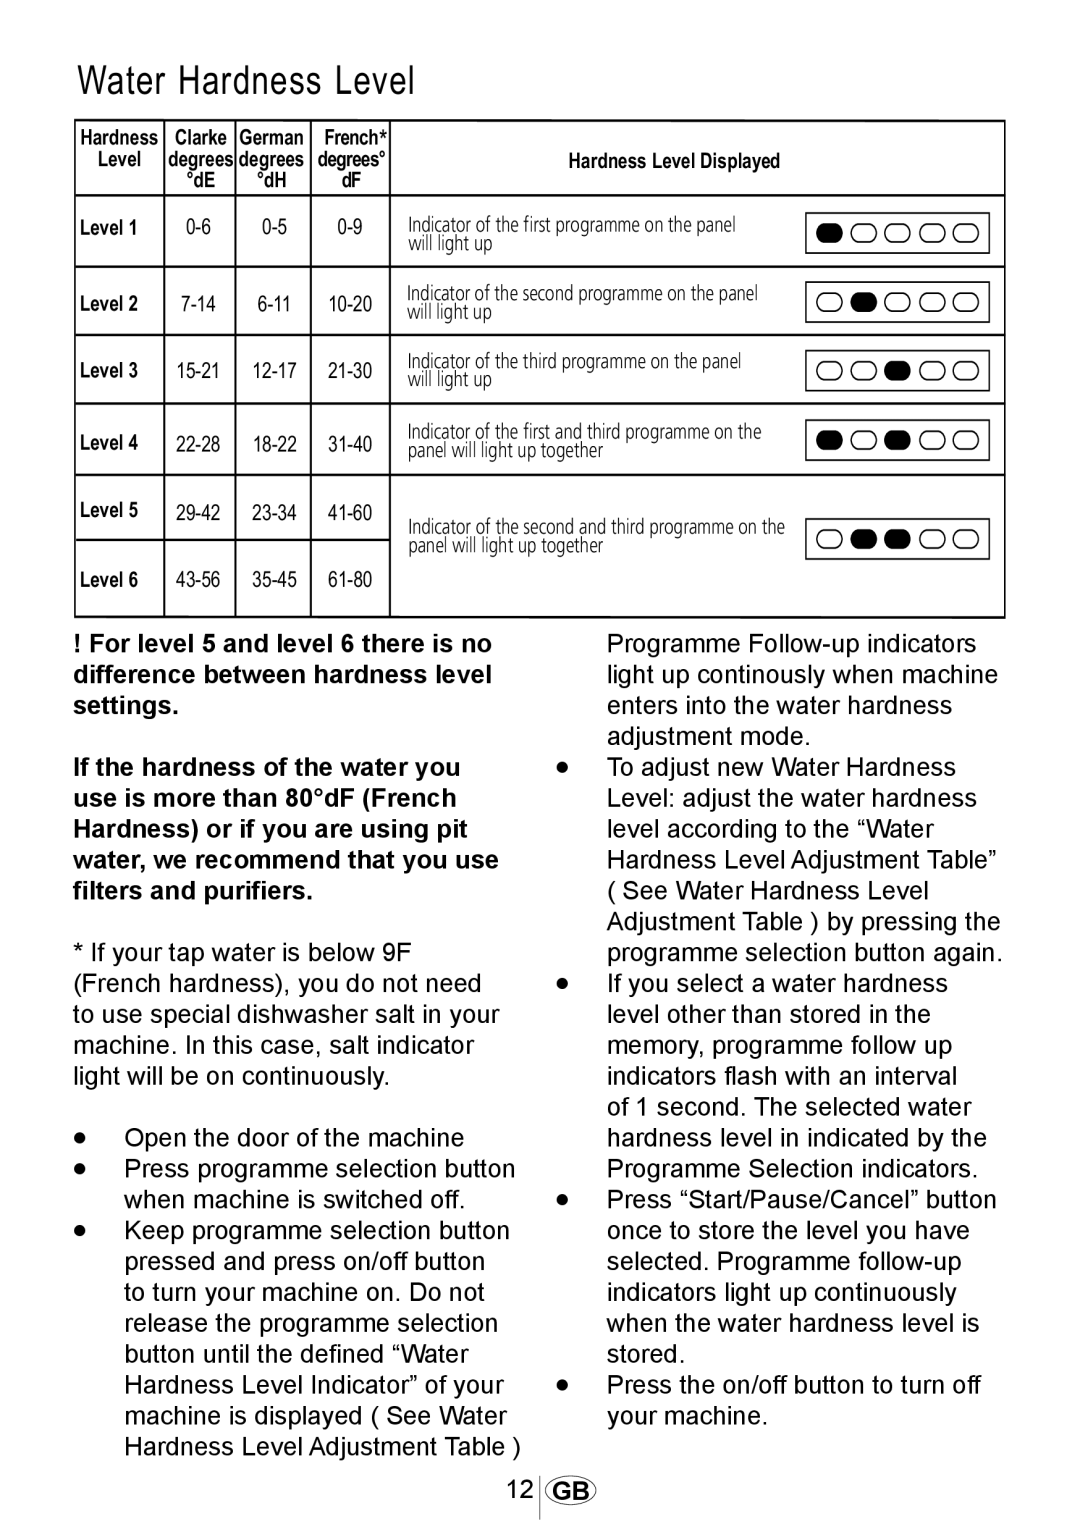 Beko DSFN 1532 manual For level 5 and level 6 there is no difference between hardness level settings 